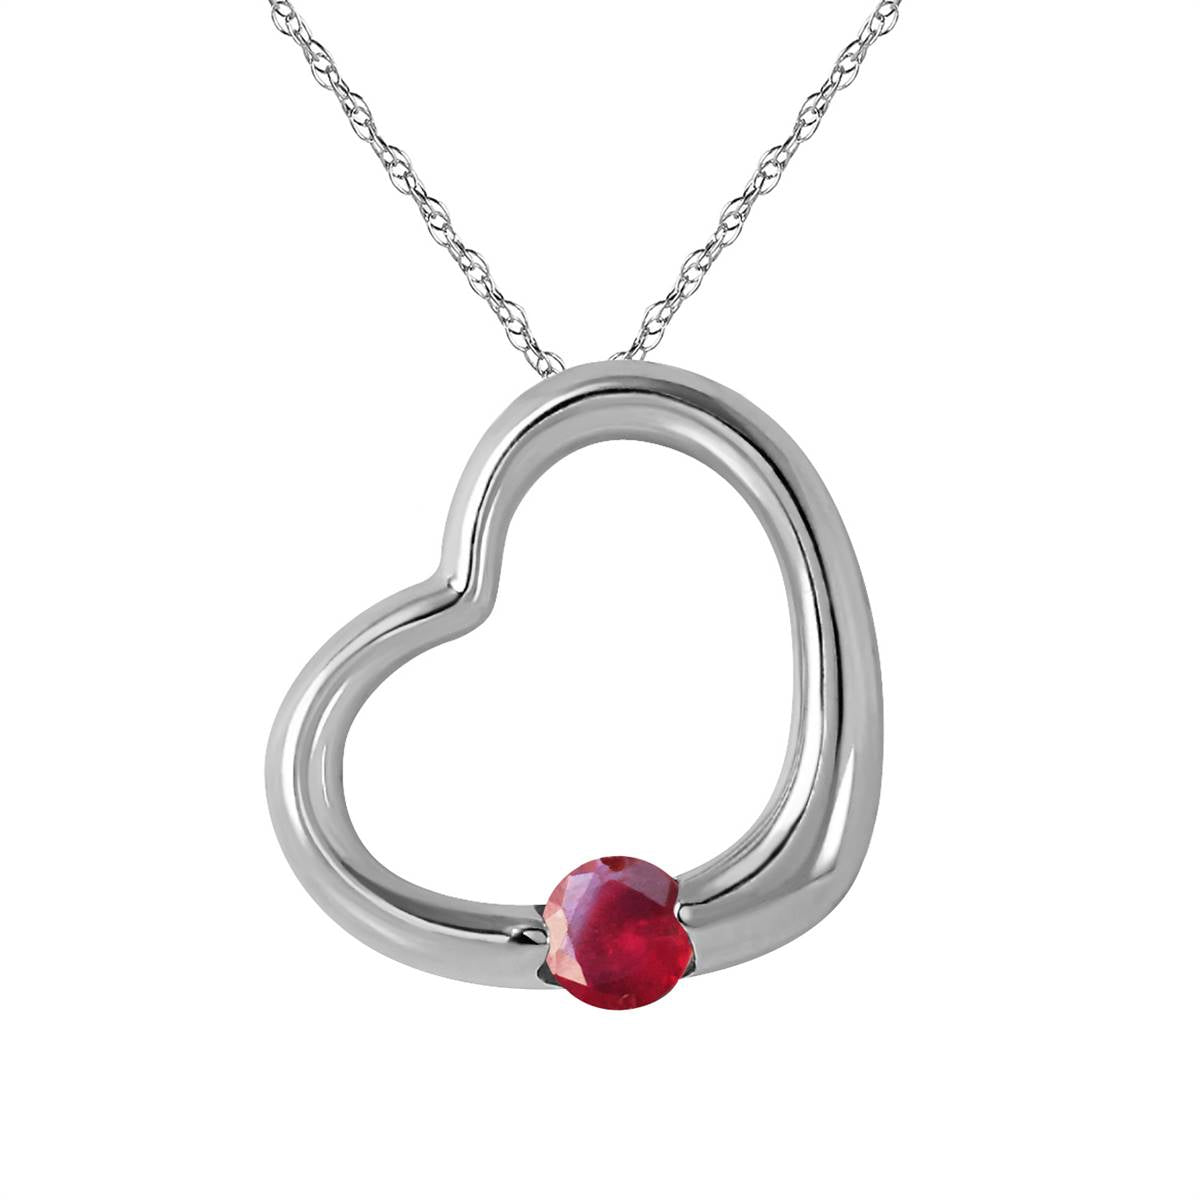 14K Solid White Gold Heart Necklace w/ Natural Ruby